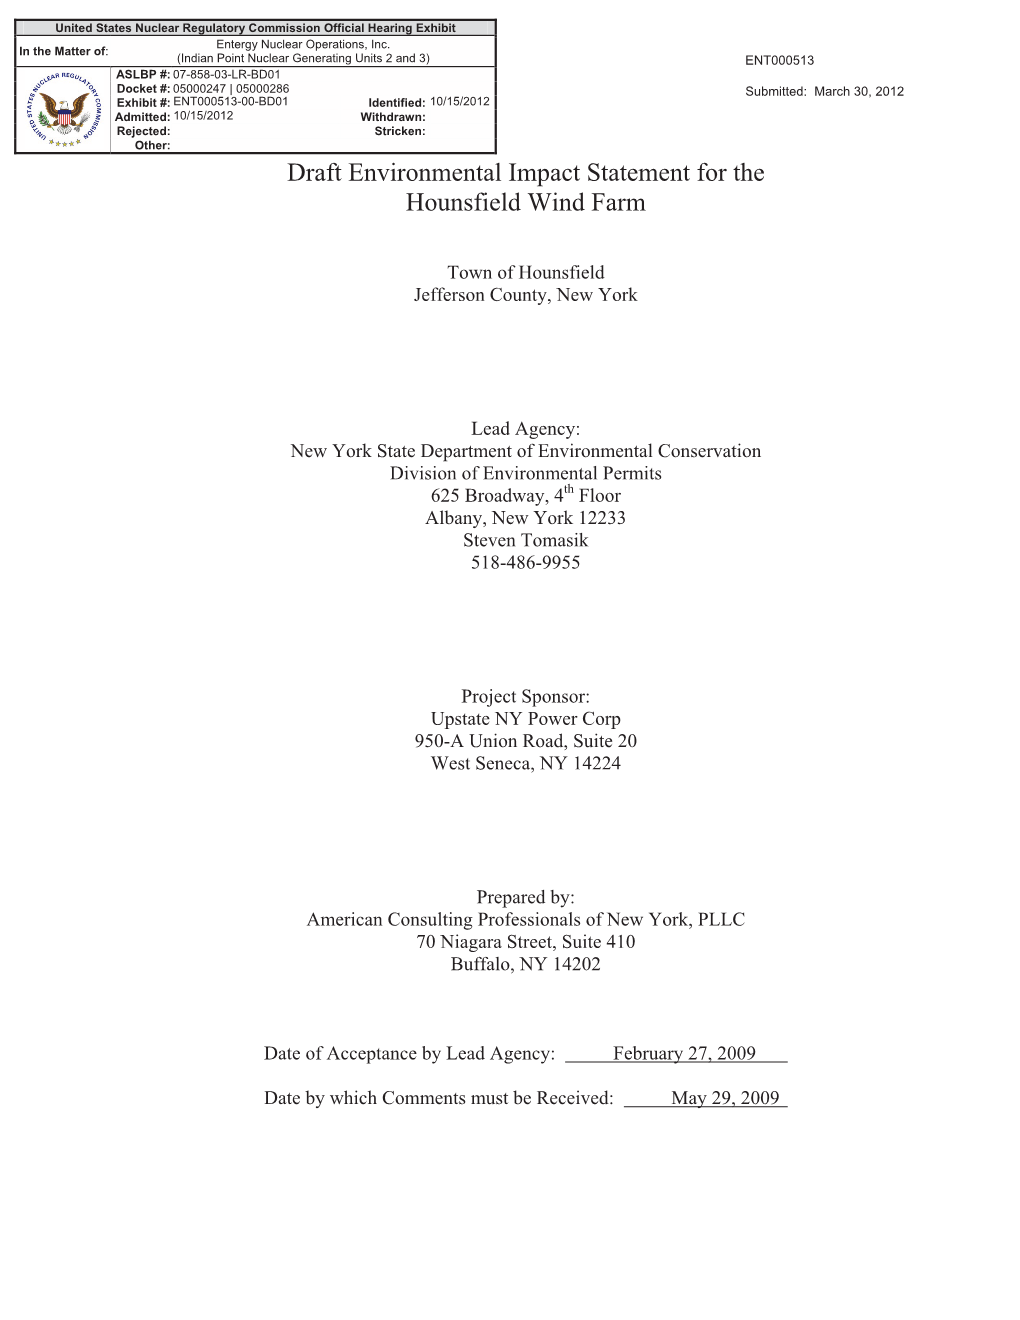 Draft Environmental Impact Statement for the Hounsfield Wind Farm